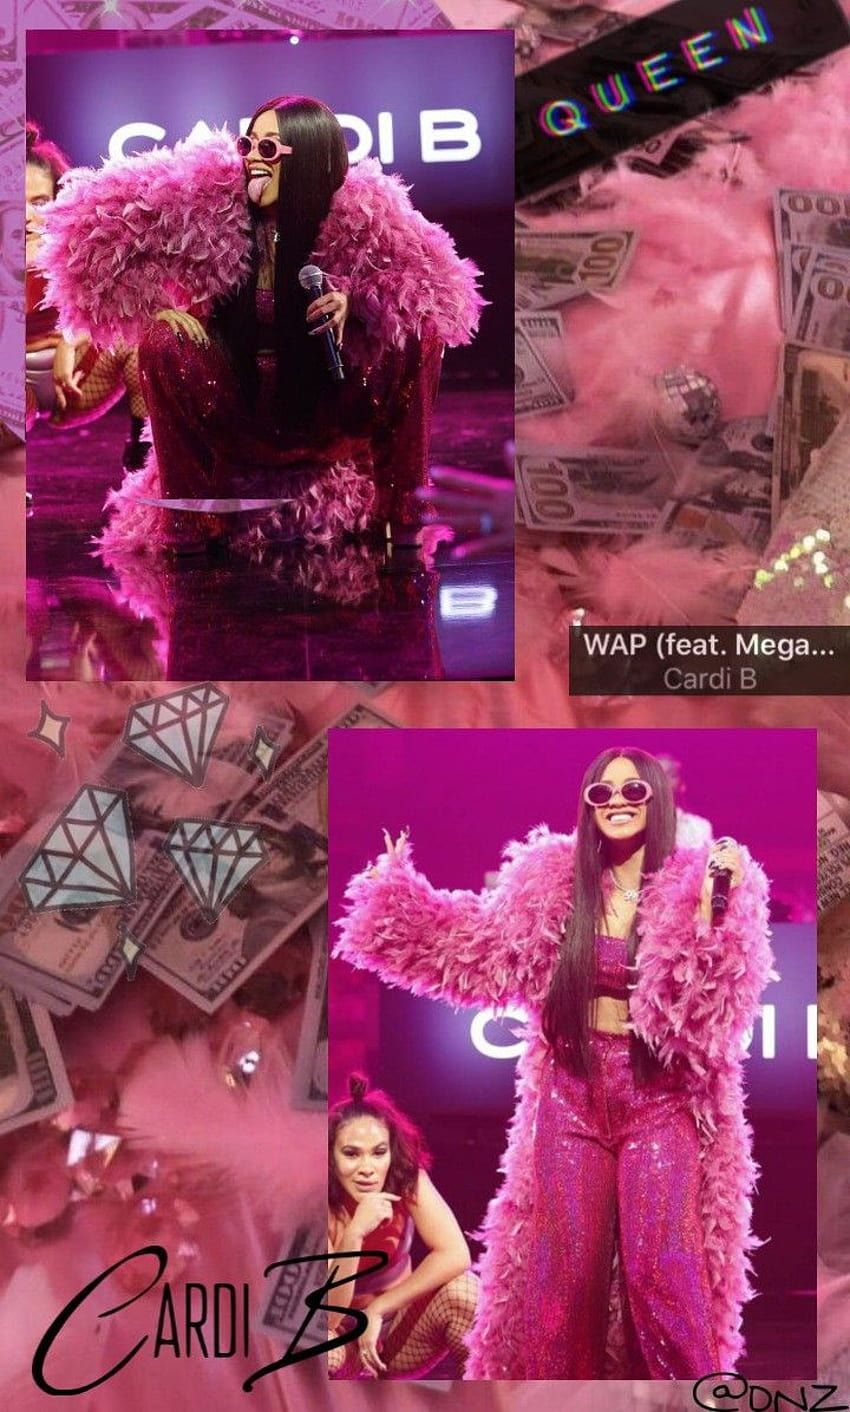 A collage of Cardi B in a pink feathered jacket and sunglasses. - Cardi B